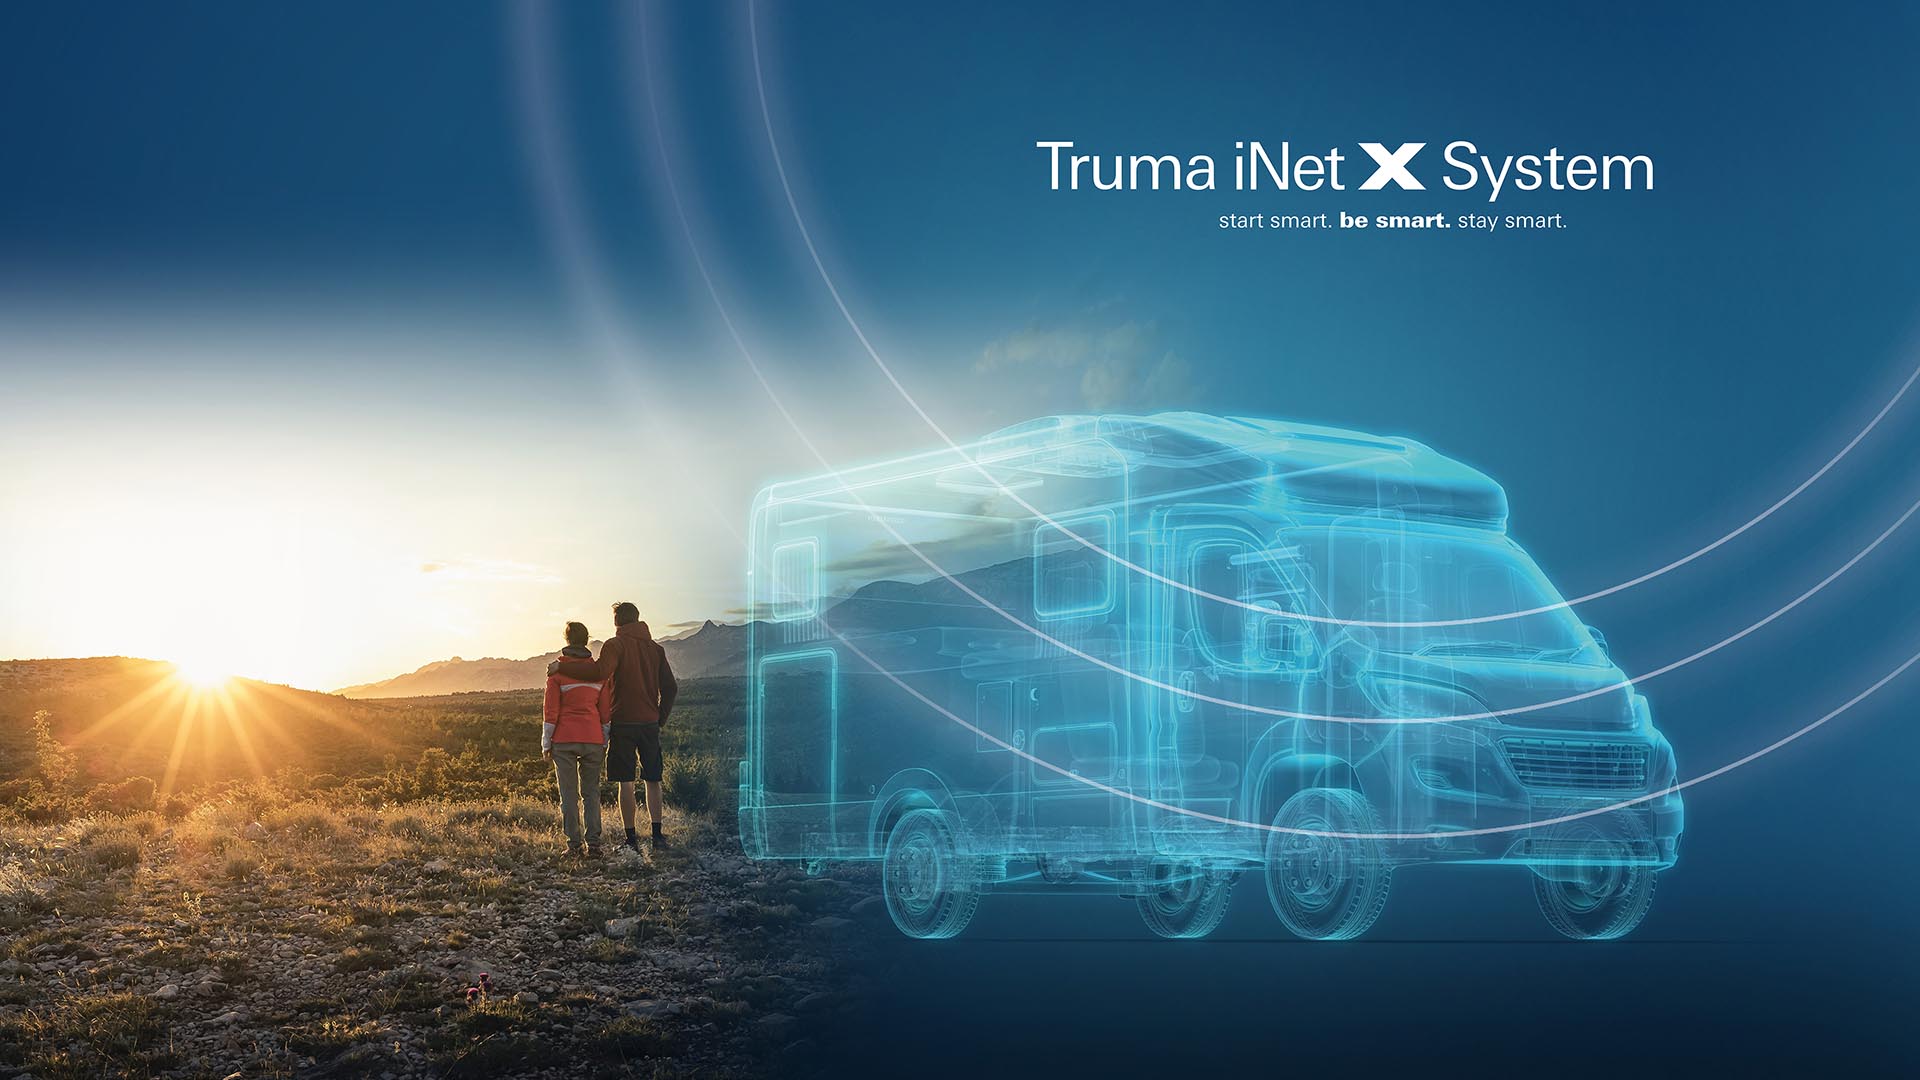 Truma increasingly digital thanks to the arrival of the smart